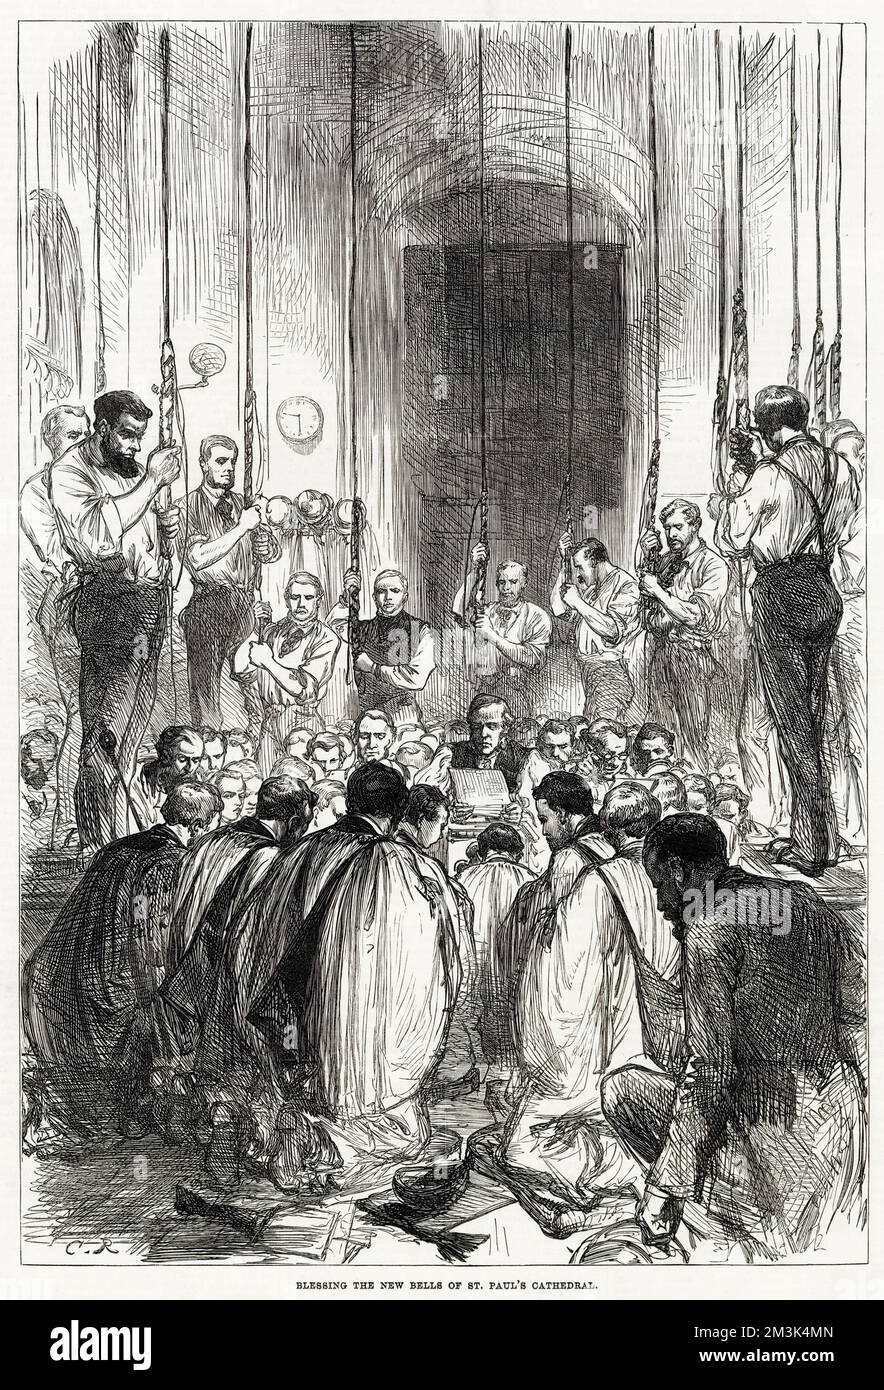 Ceremony held to bless the newly installed bells of St. Paul's Cathedral, London. A group of clergy, kneeling in prayer, and the ringers, members of the 'Ancient Society of College Youths', standing at their ropes. Stock Photo